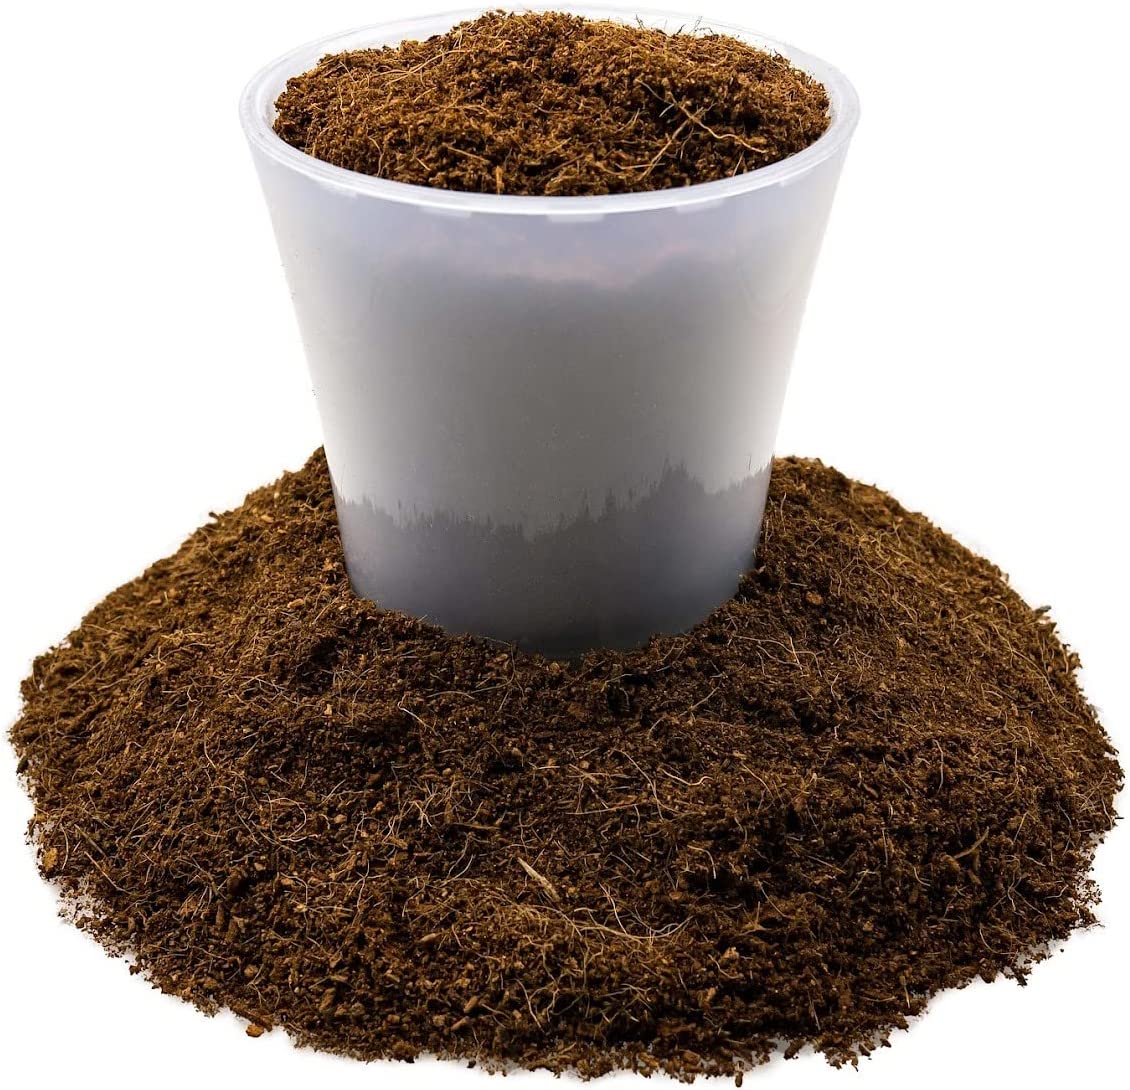 ⭐ PREMIUM Organic Coconut Coir Mix for Home Gardening - All Natural Soil Amendment - PH Balanced and Double Washed Coco Coir by ://N ★ LOVA - 2 Quart Bag - image 4 of 4